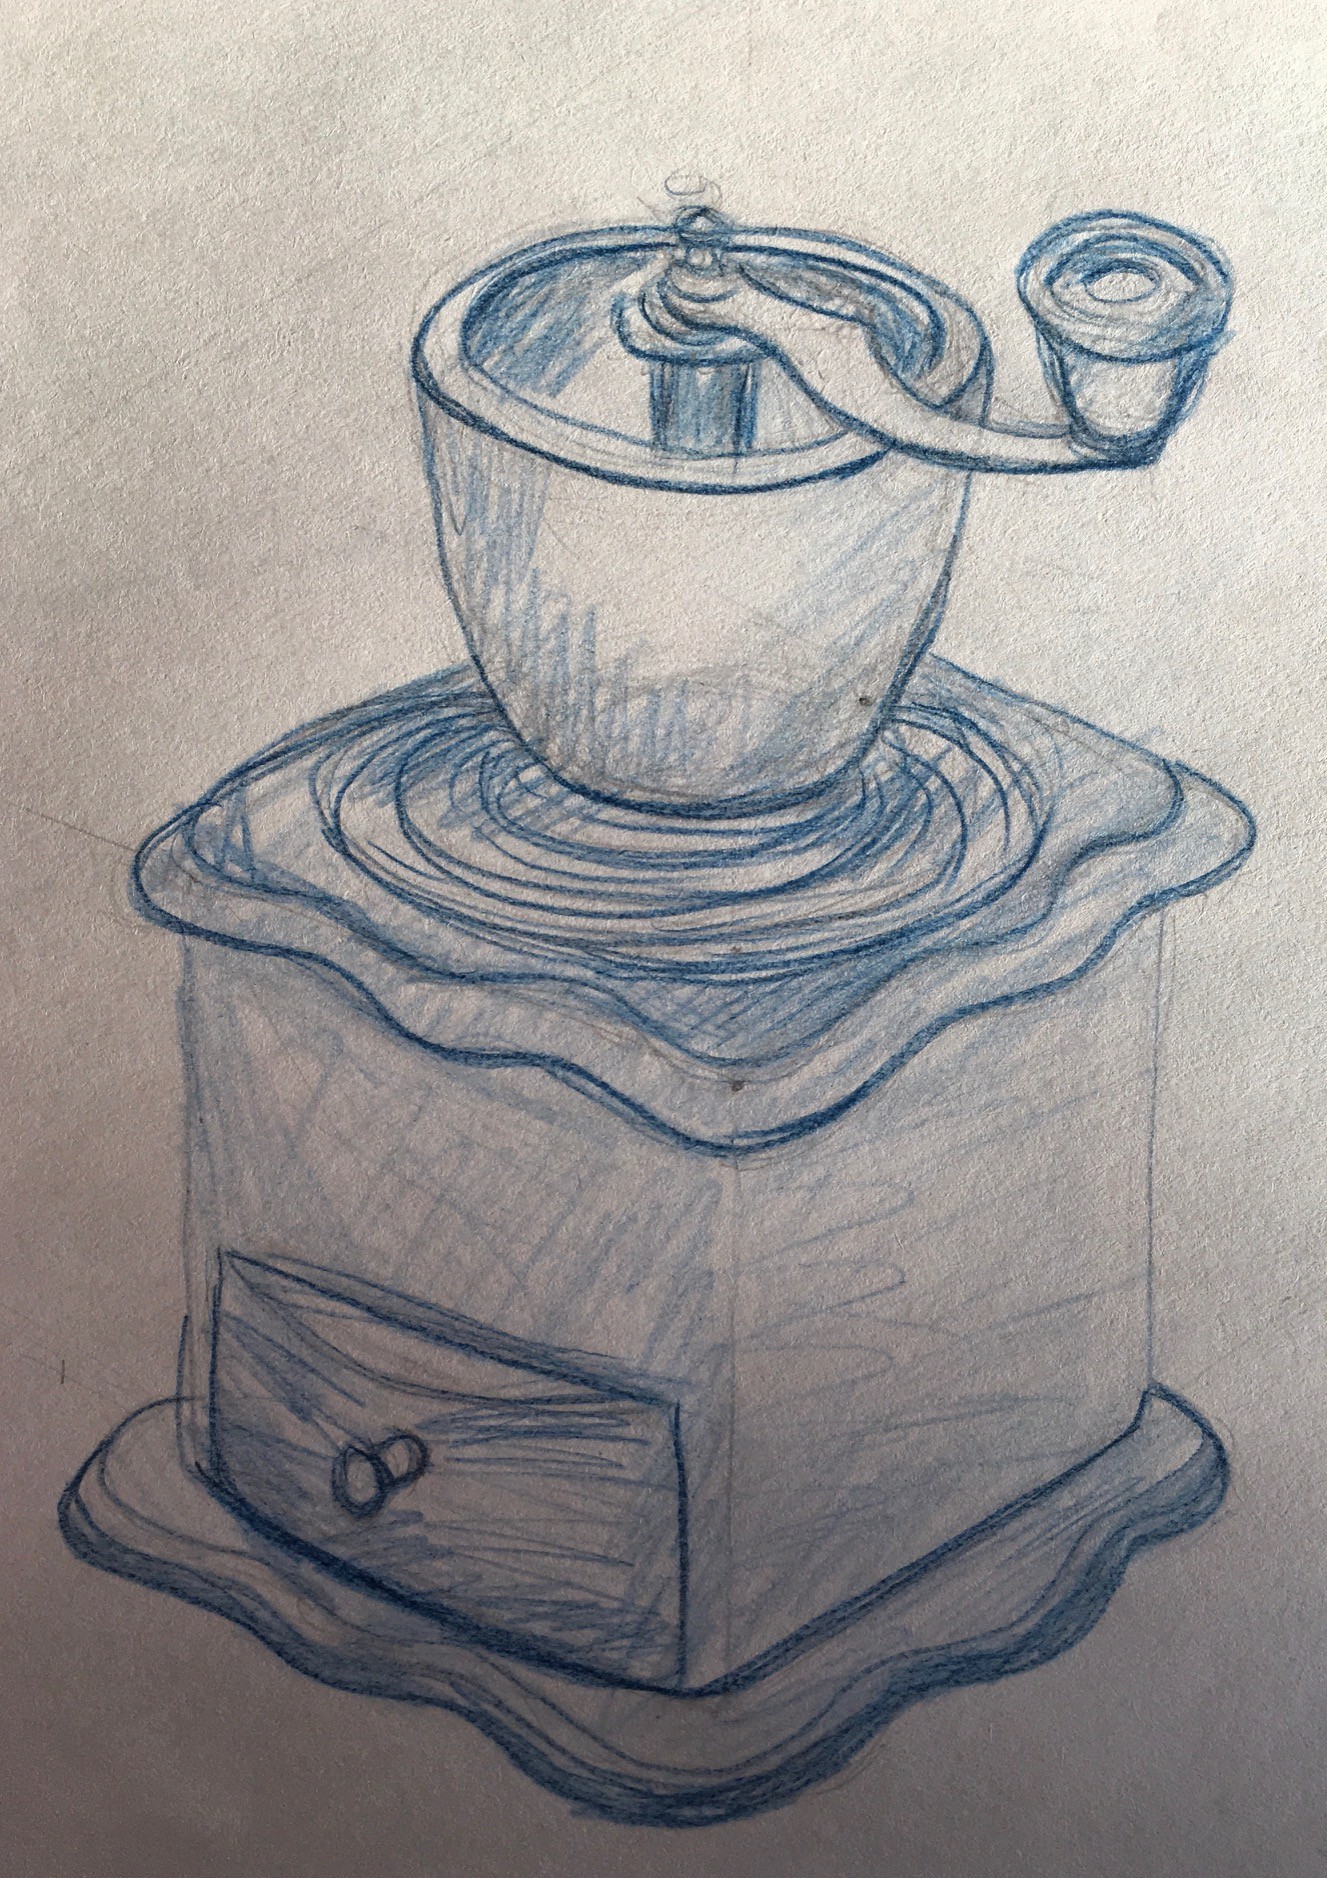 Coffee Grinder, 2018
Pencil and Colored Pencil on Paper
7"W x 9.5"H, Walli White, artist